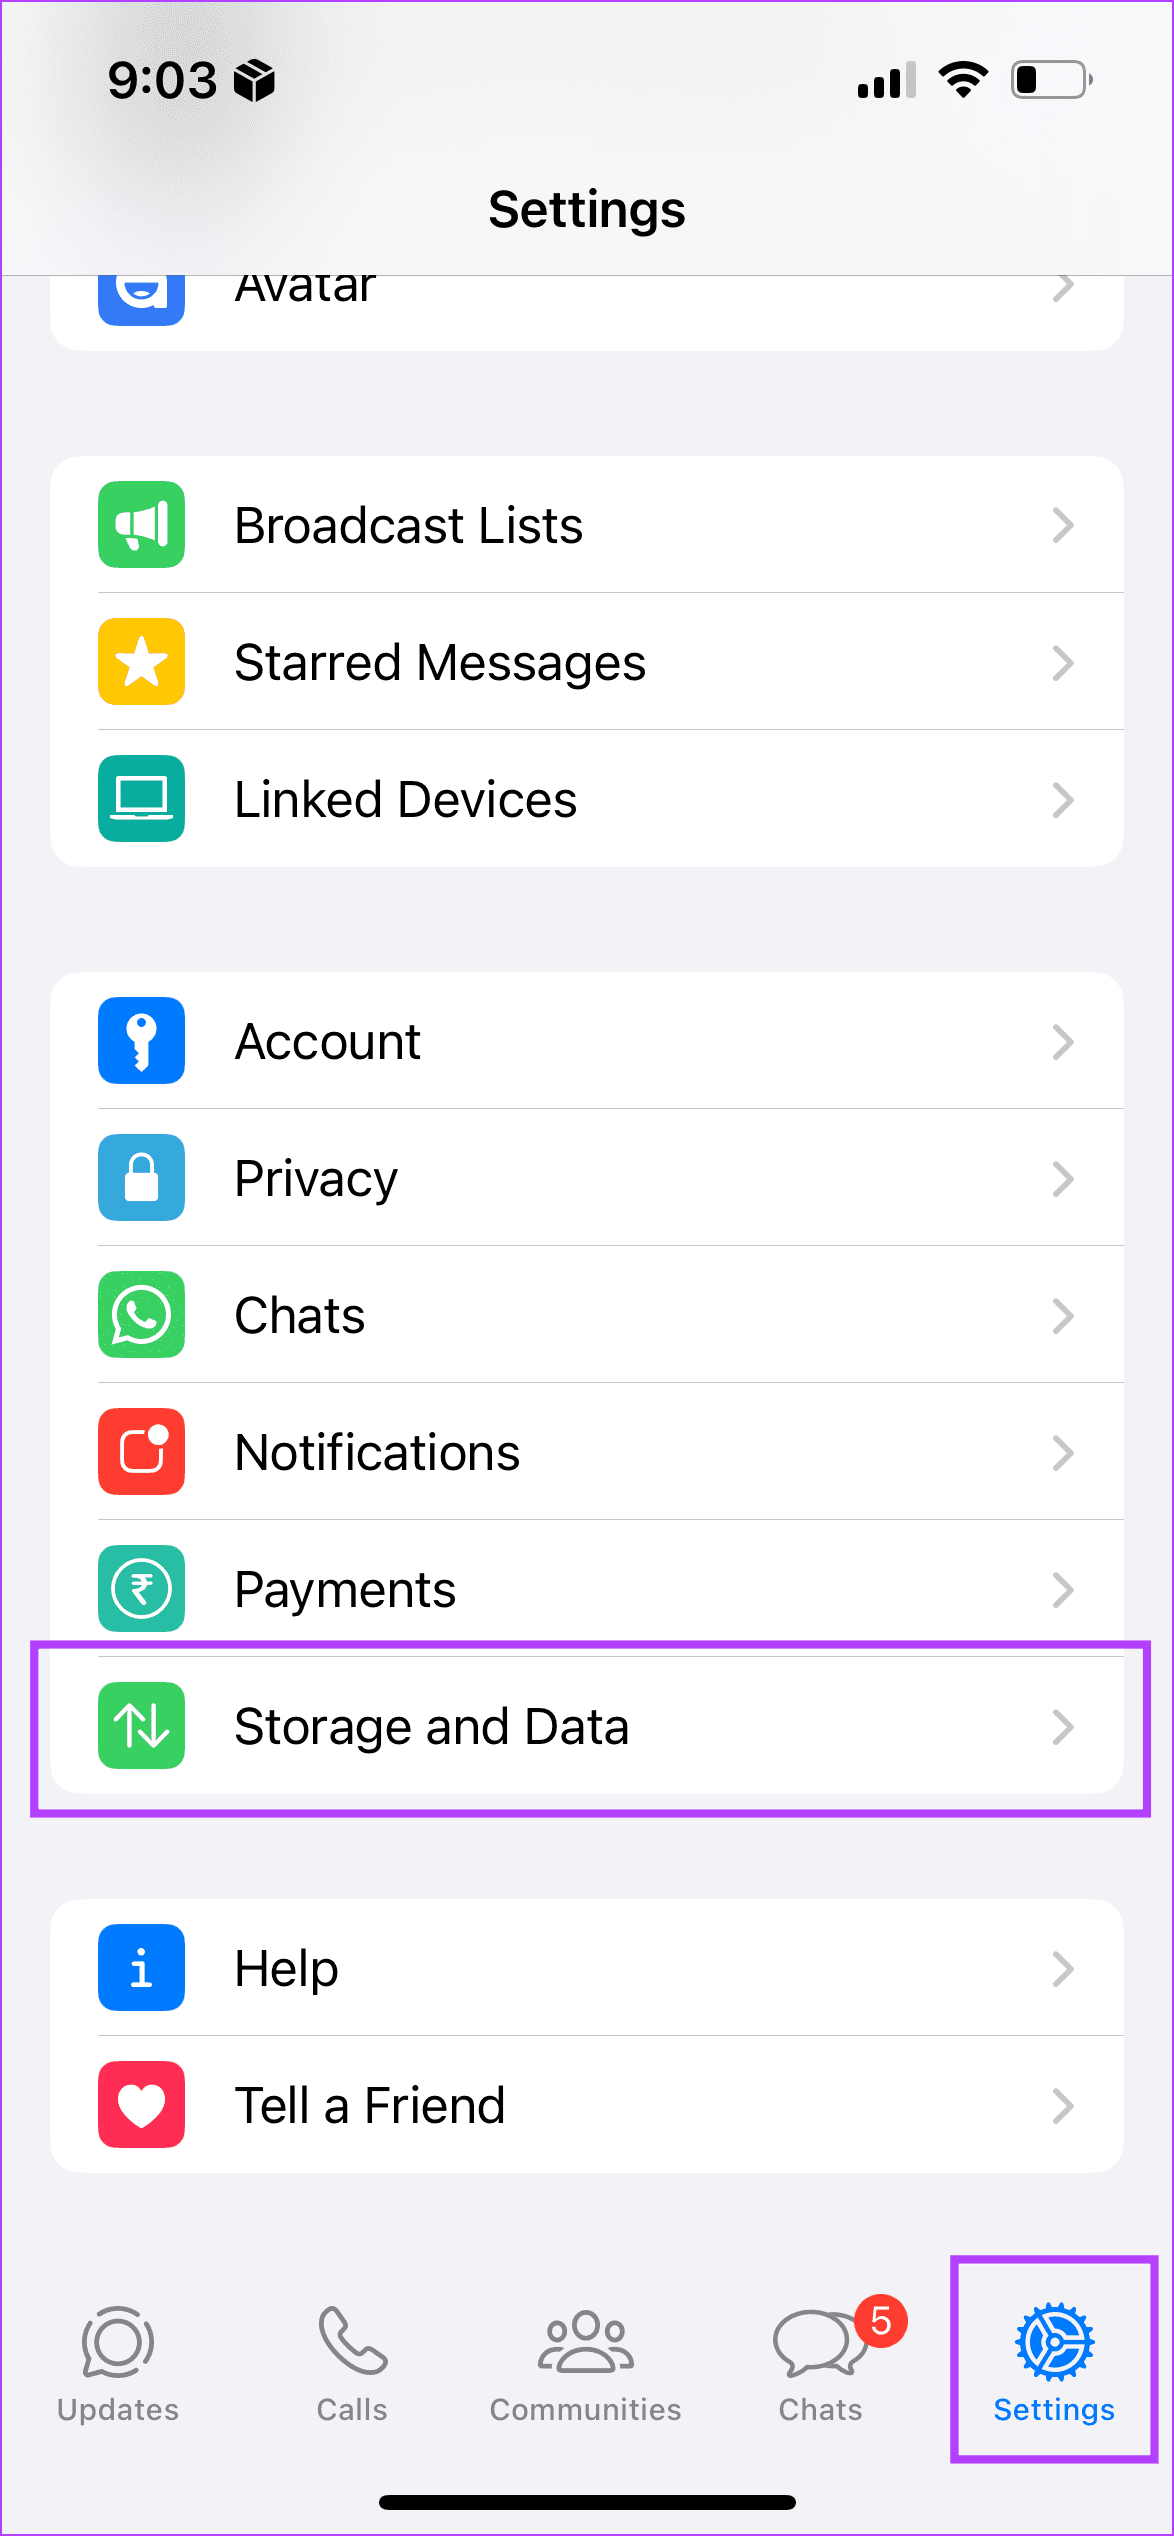 Open Storage and Data settings